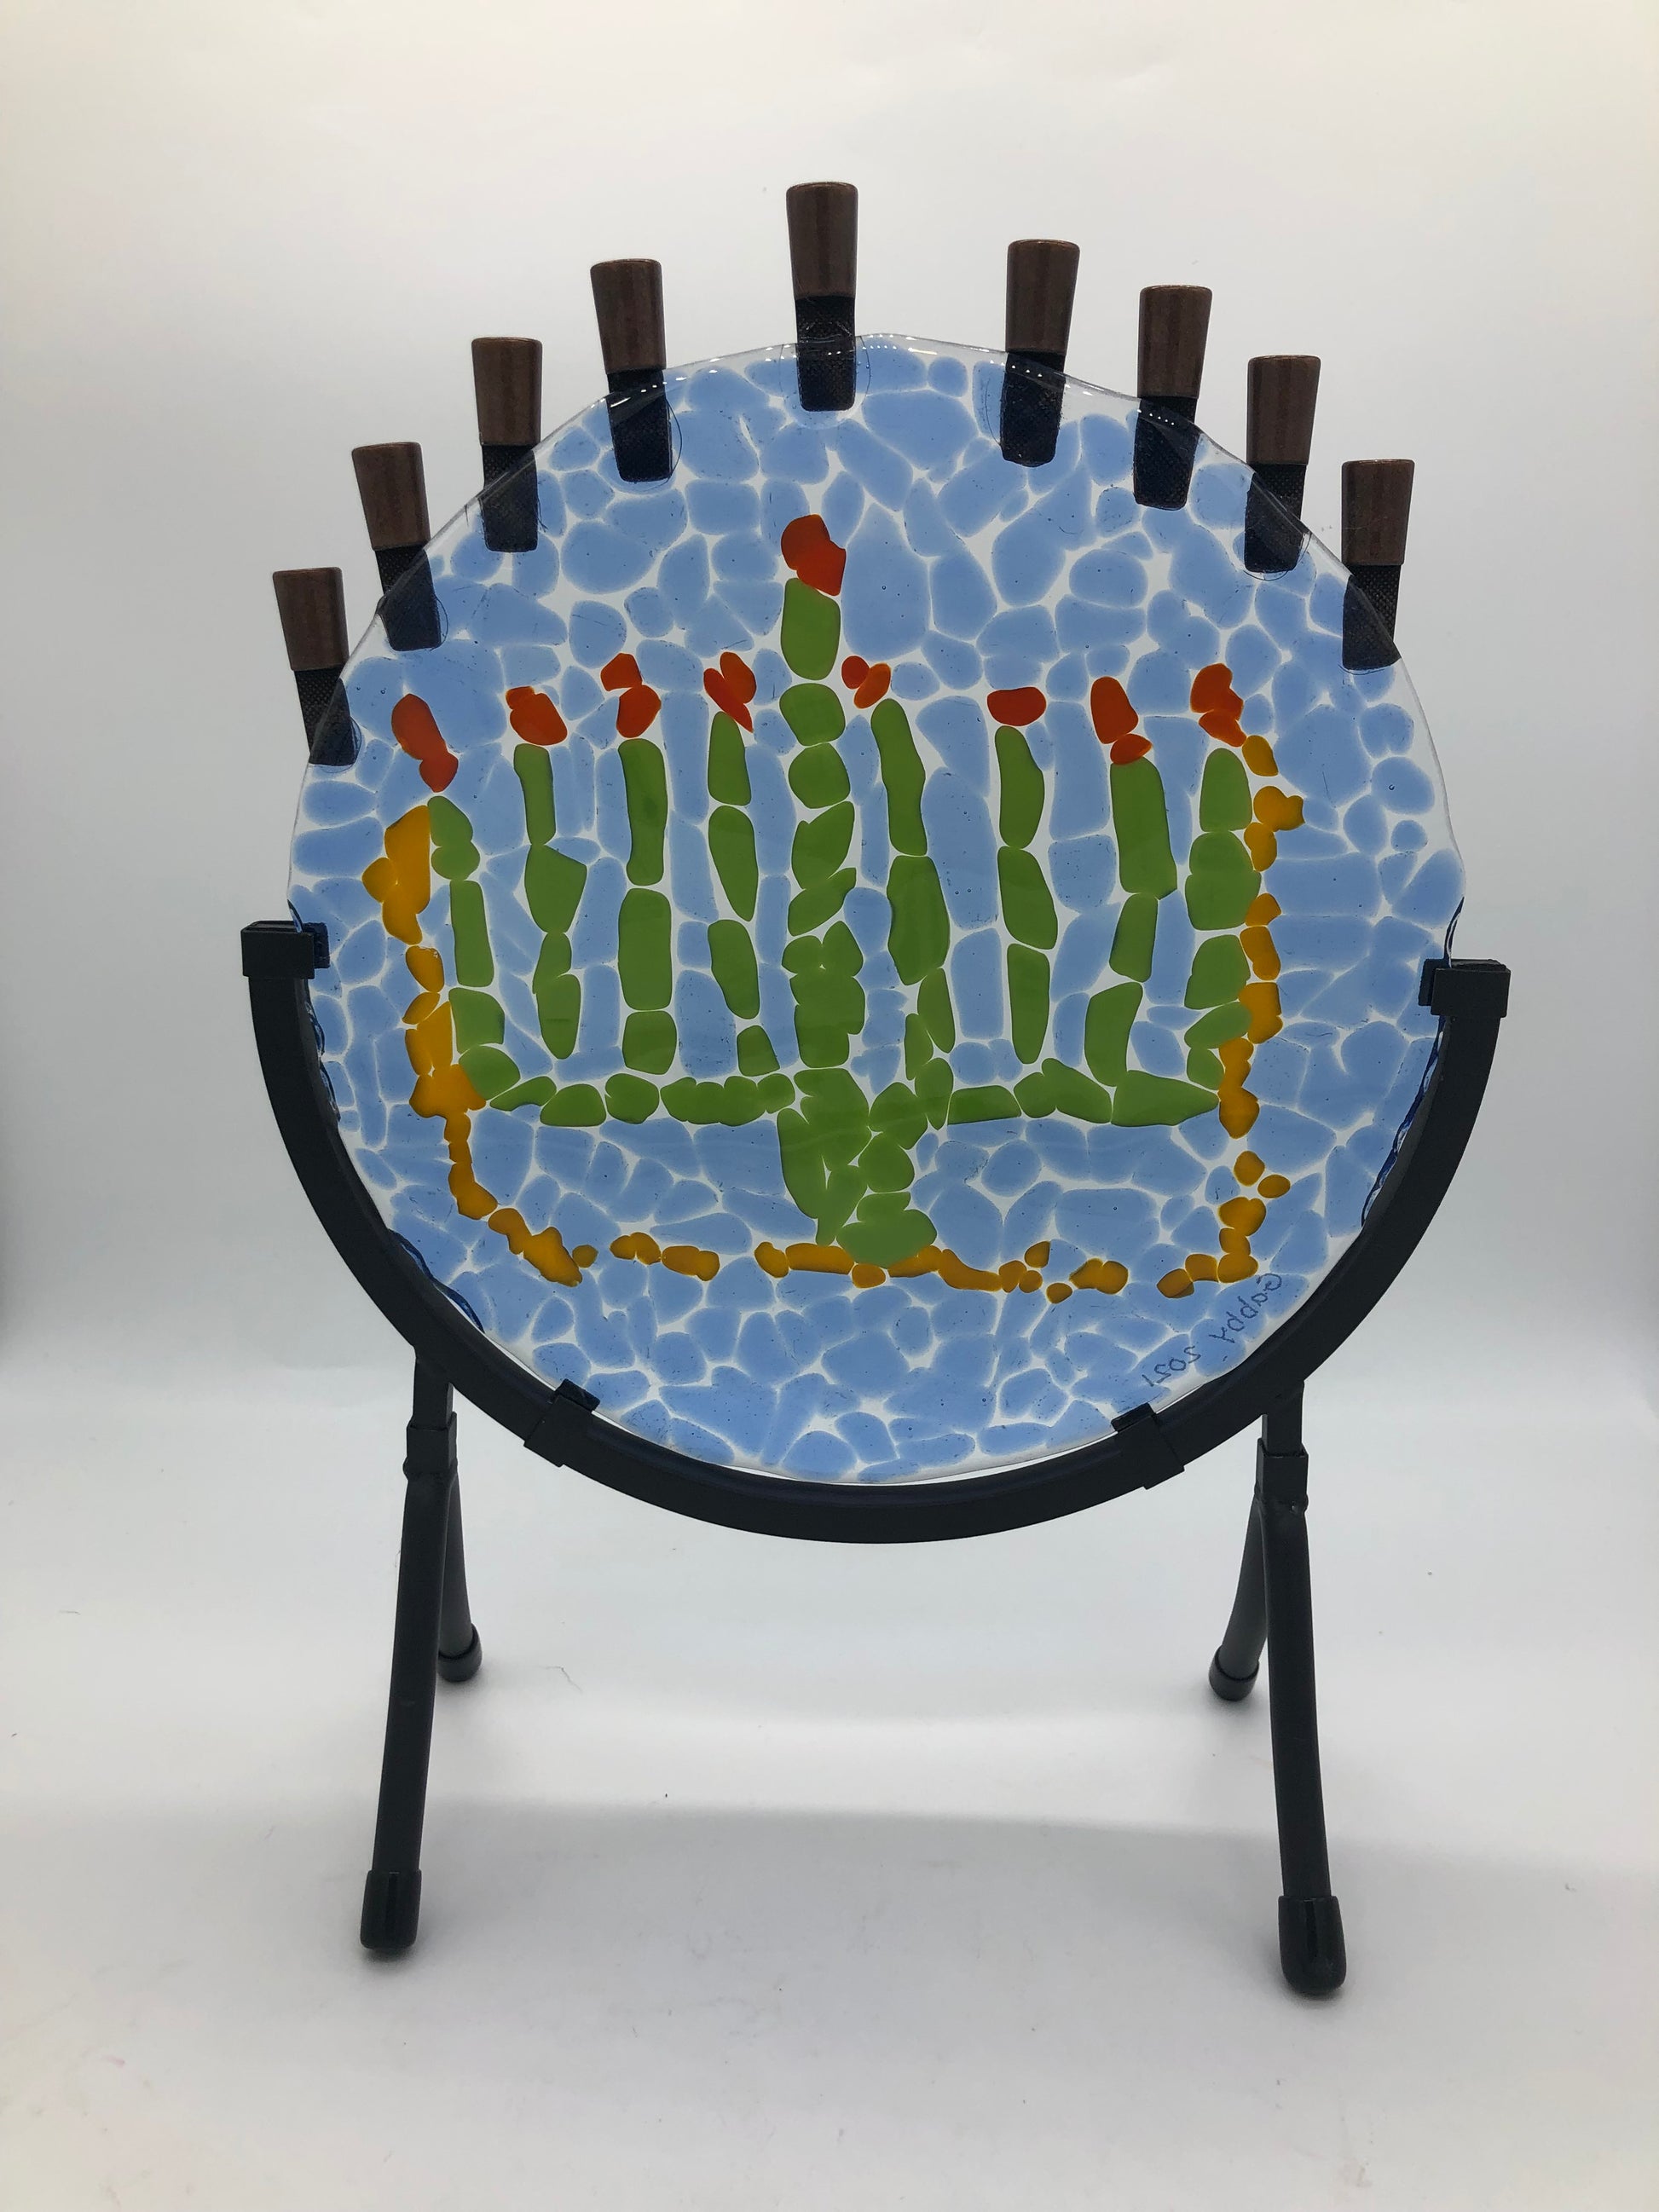 Round fused glass piece with design of a menorah done in green with yellow outline around three sides.  the menorah is surrounded by blue chunks of glass.  There are nine candle cups on the top of the glass and is held in by a semi-circular metal frame.